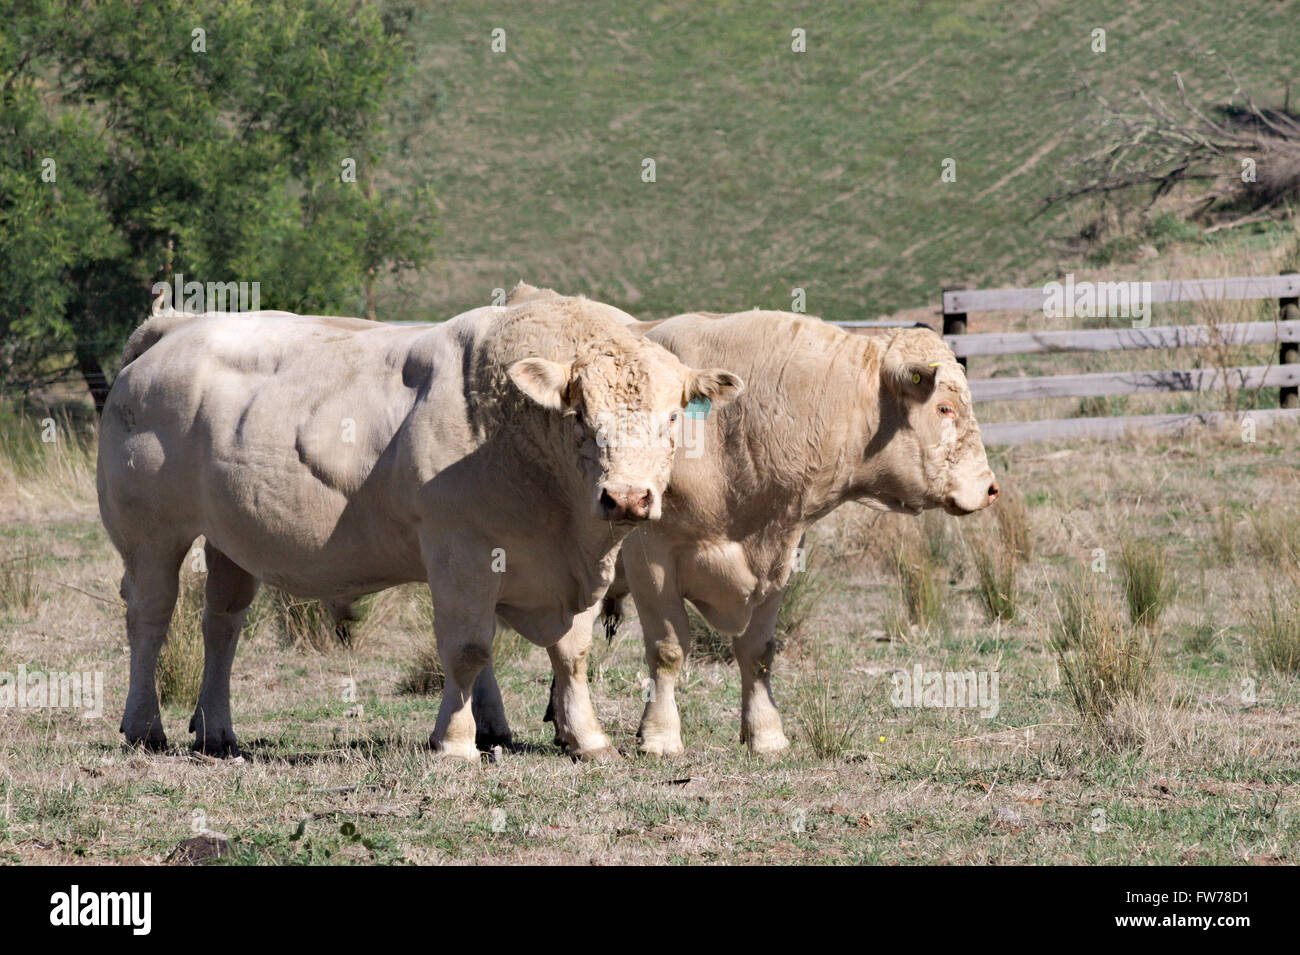 Two white Charolais bulls standing side by side in a dry Australian fenced paddock. Stock Photo